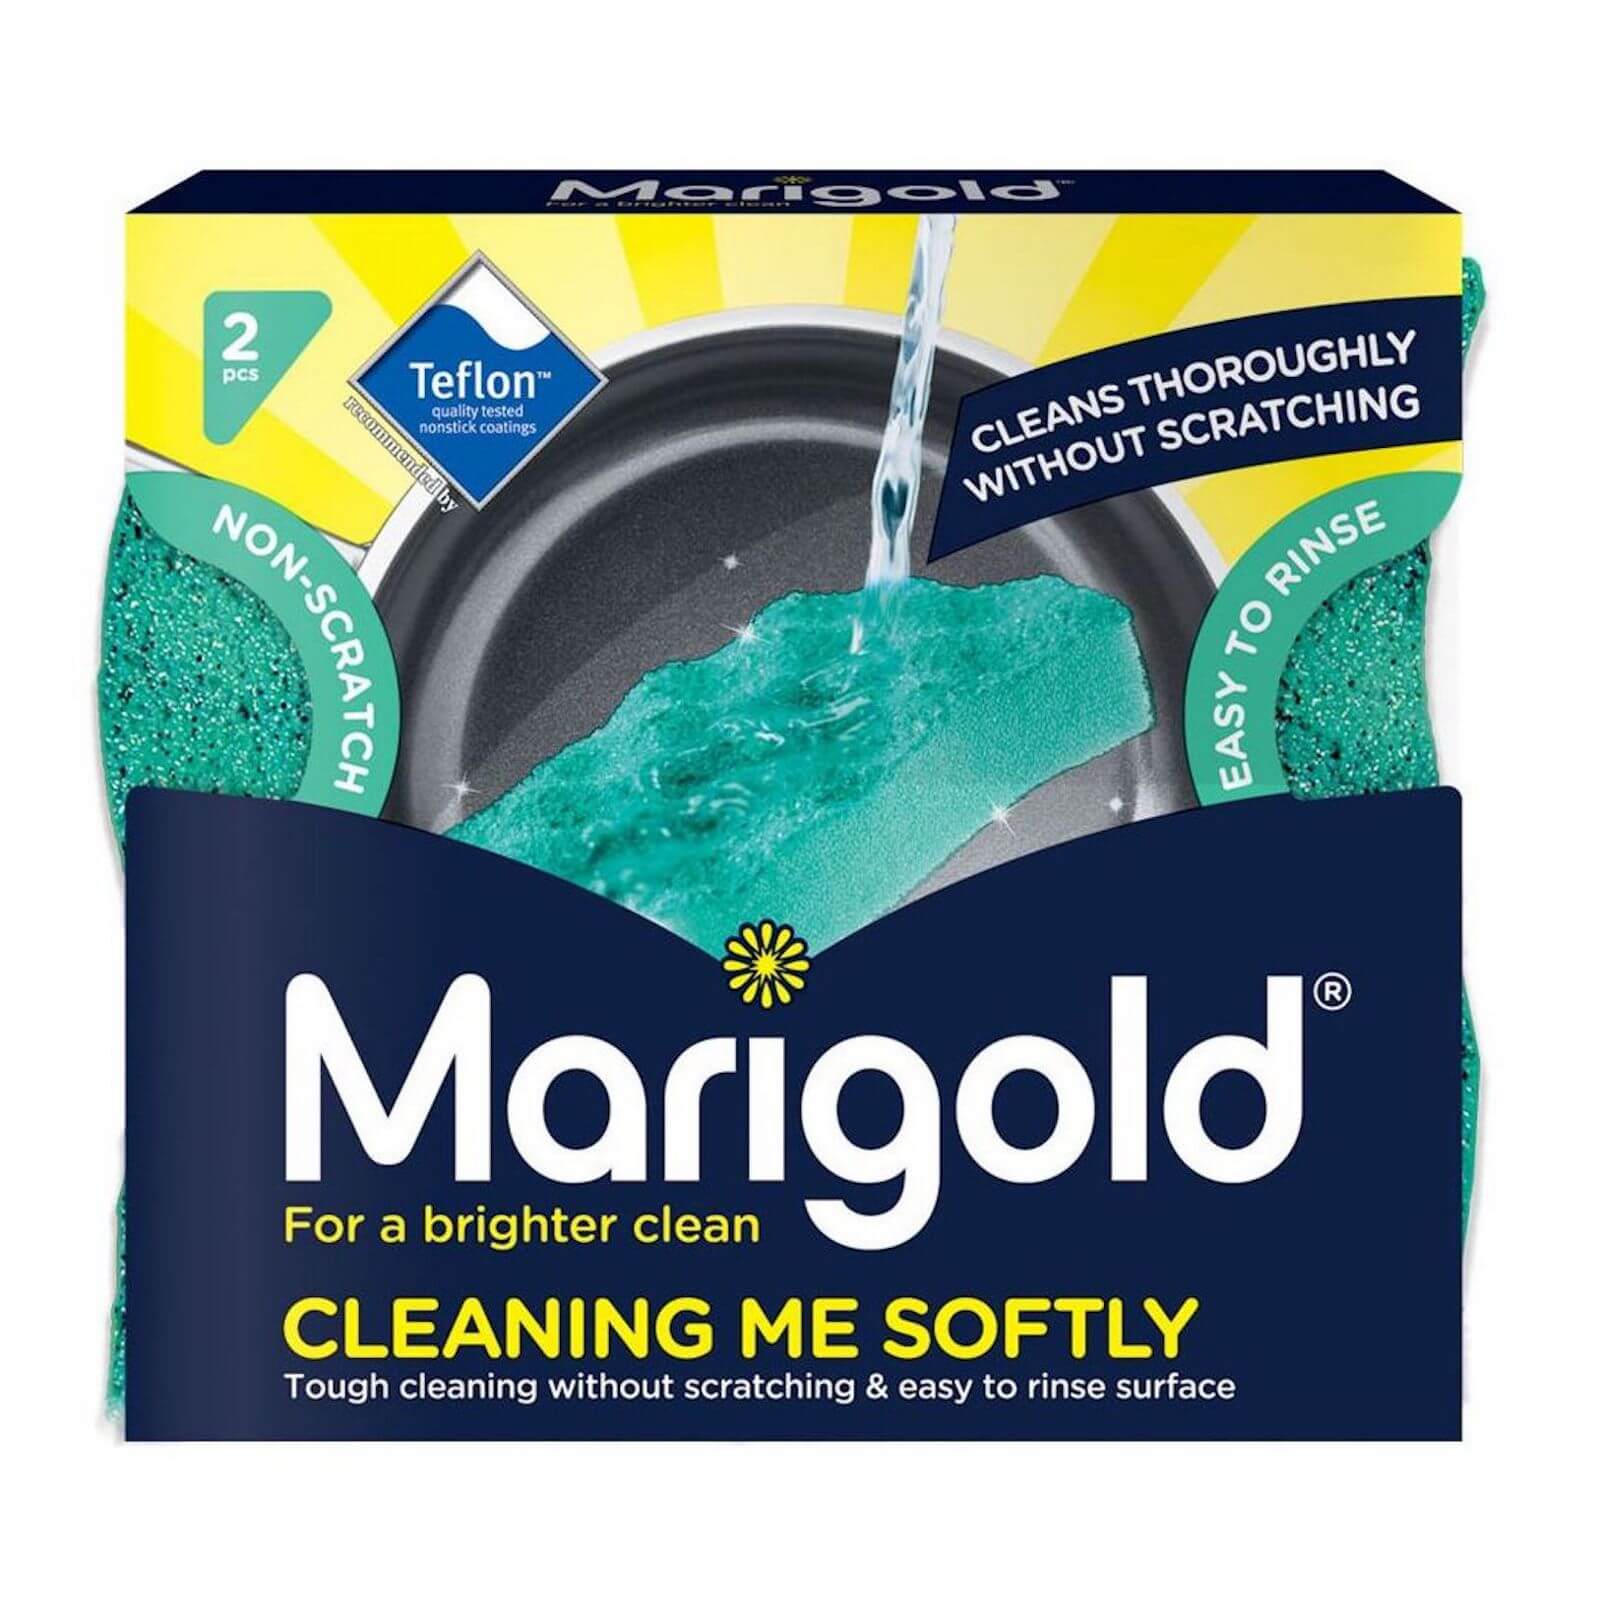 Marigold Cleaning Me Softly Scourers - Pack of 2